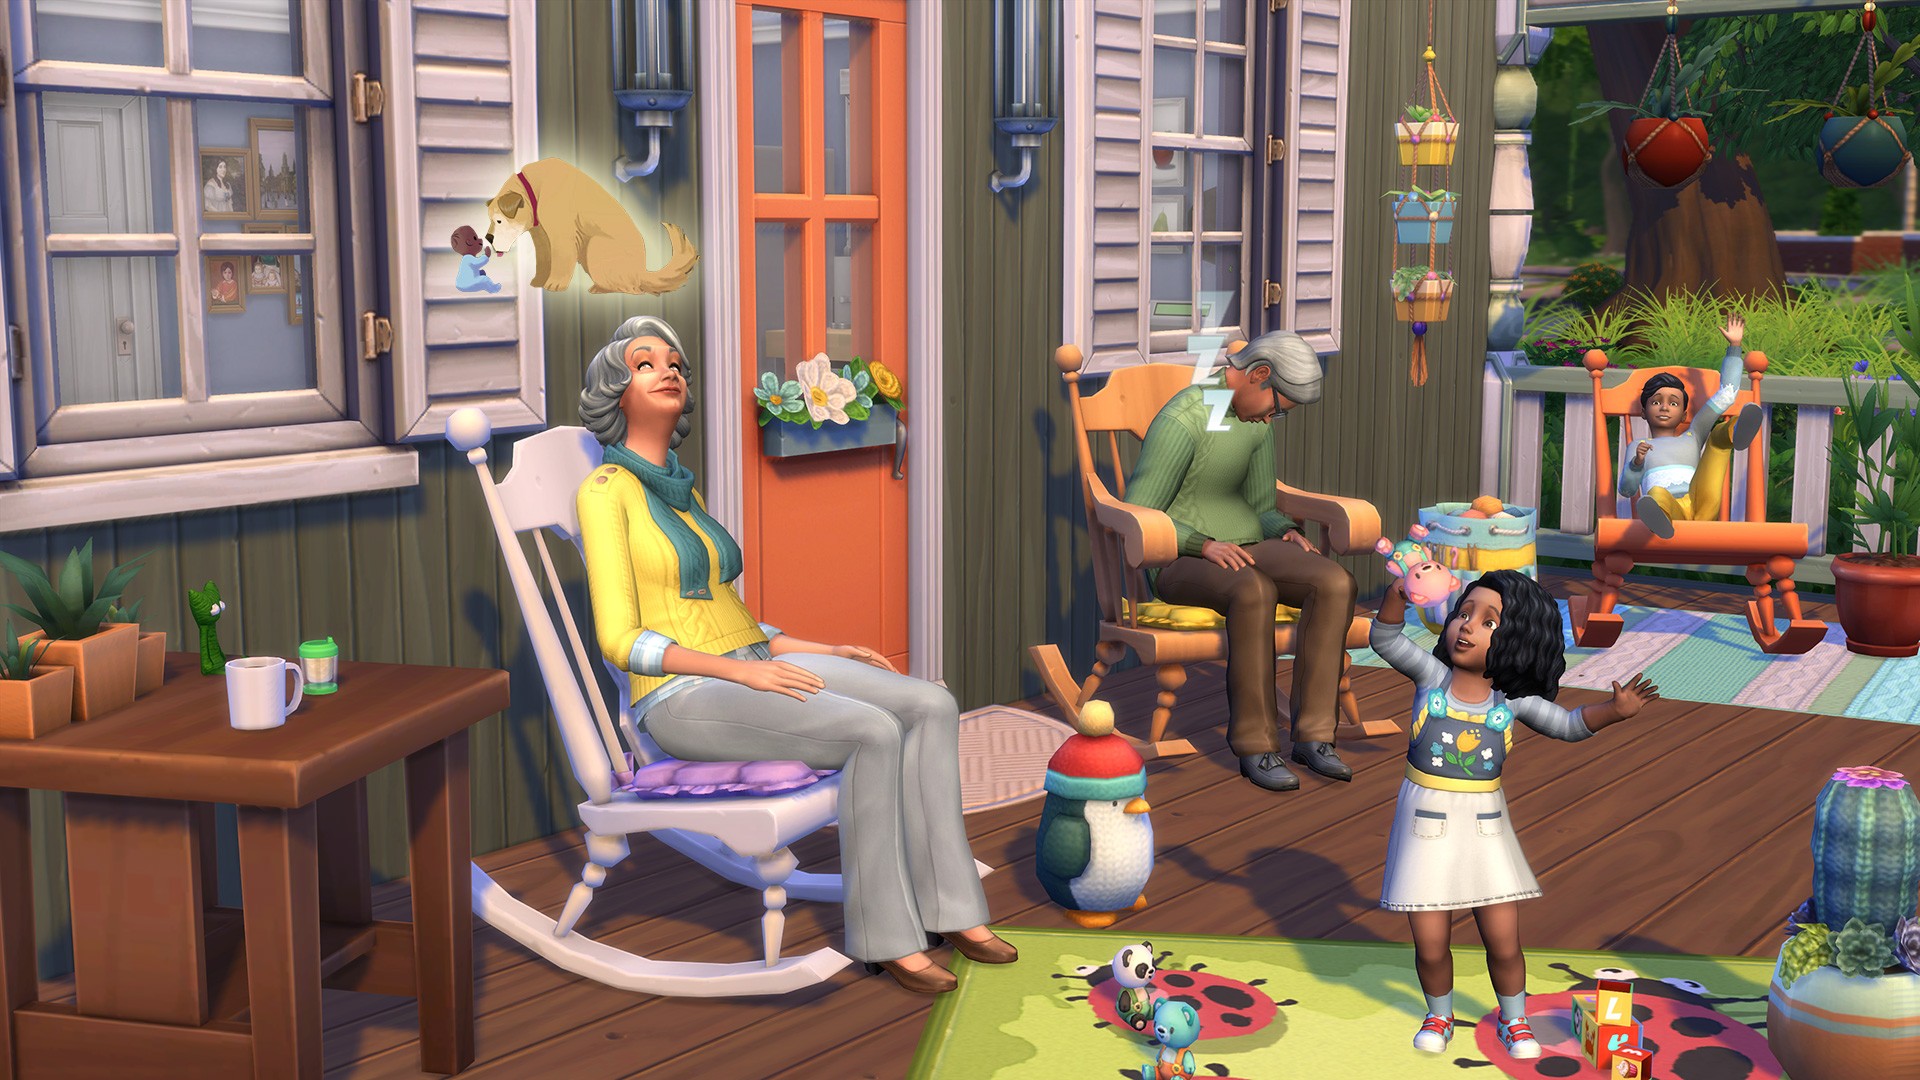 The Sims 4 Nifty Knitting Stuff: 3 Official Screens